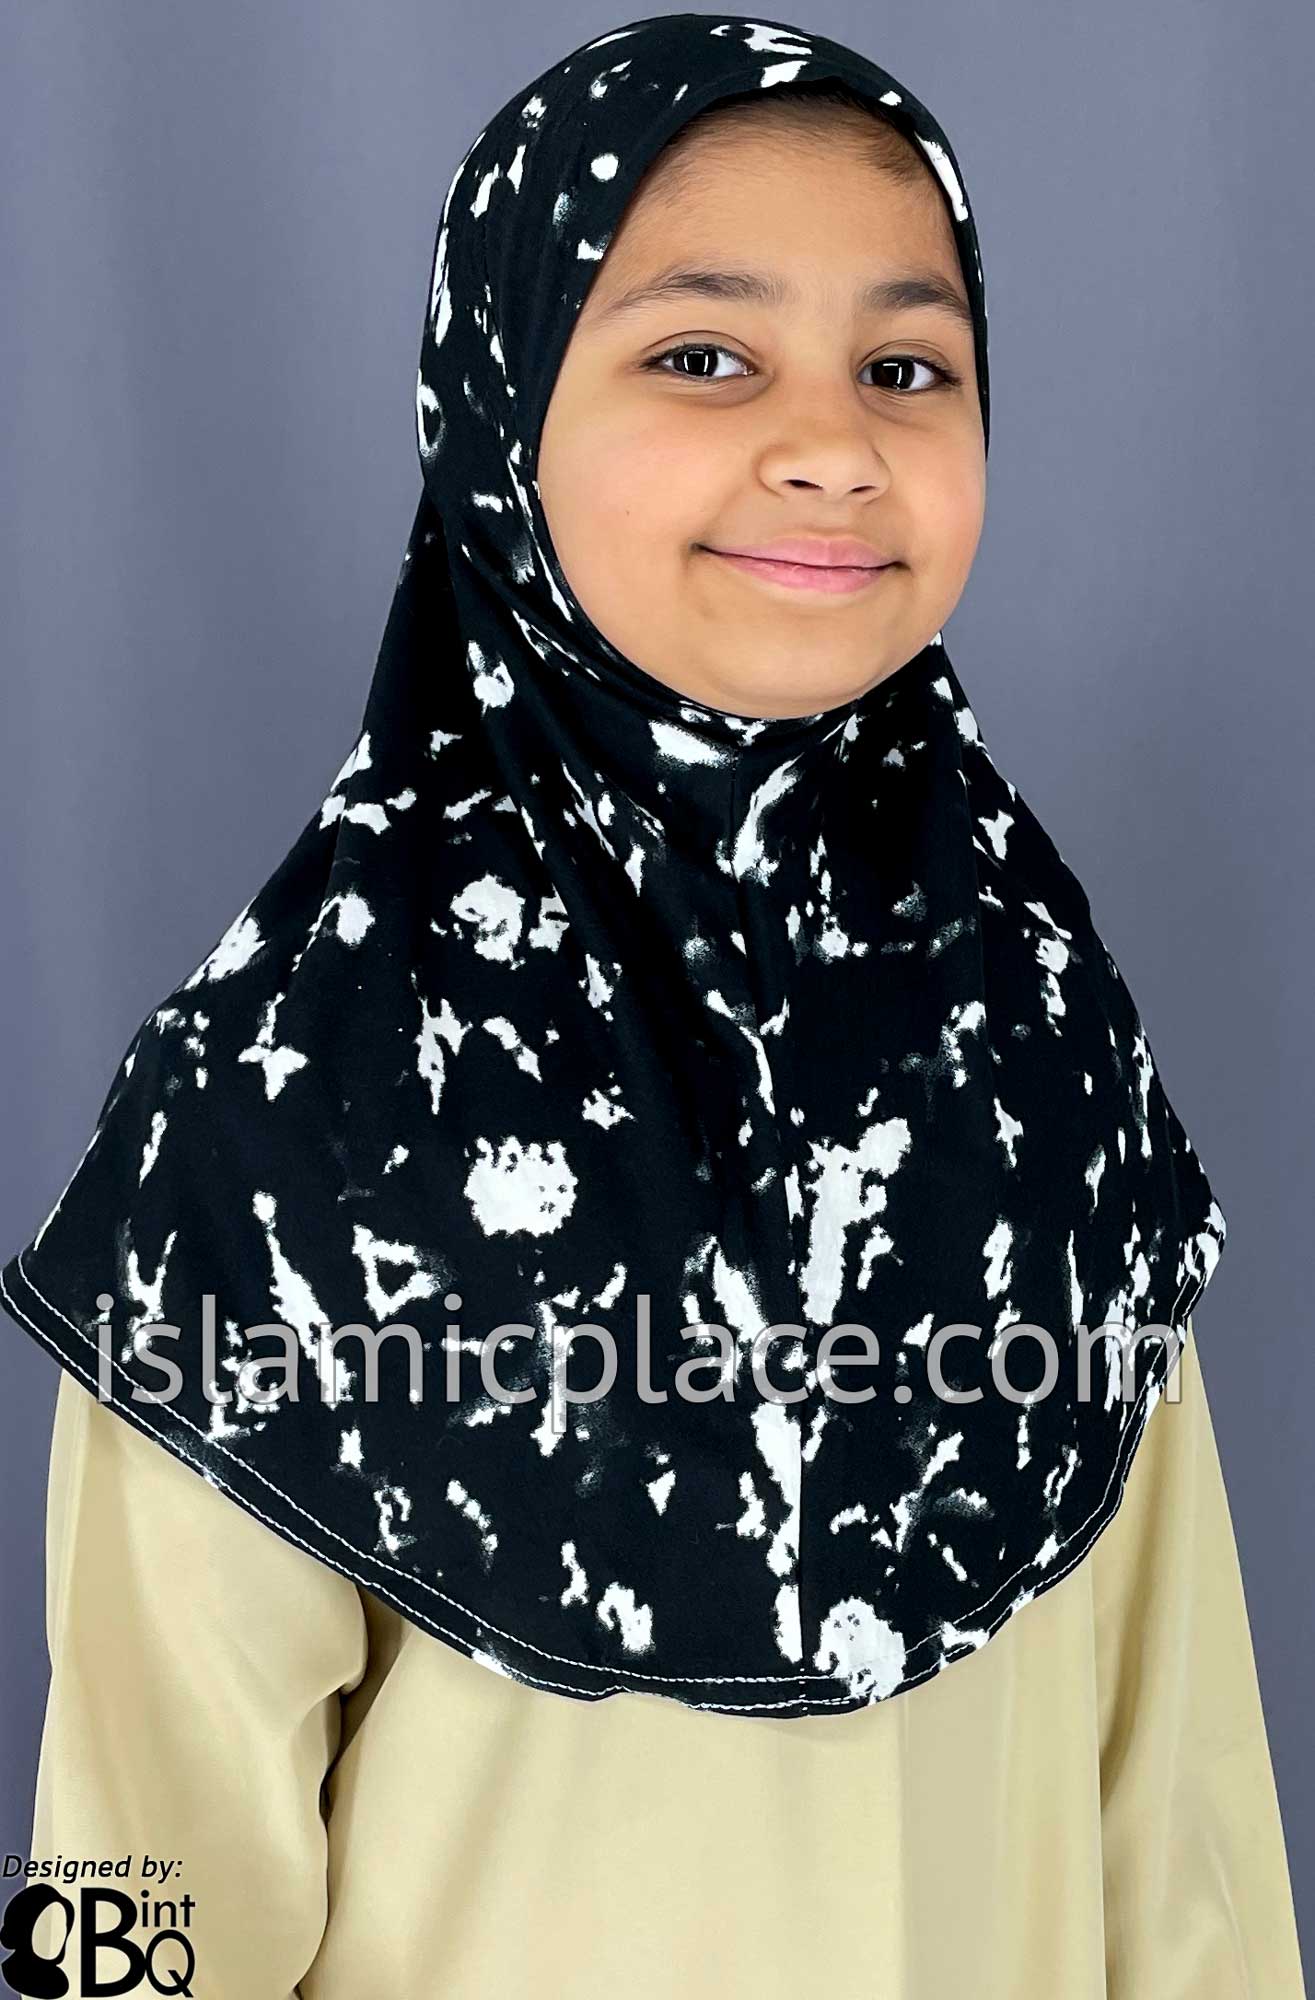 Black and White Smudges - Printed Girl size (1-piece) Hijab Al-Amira